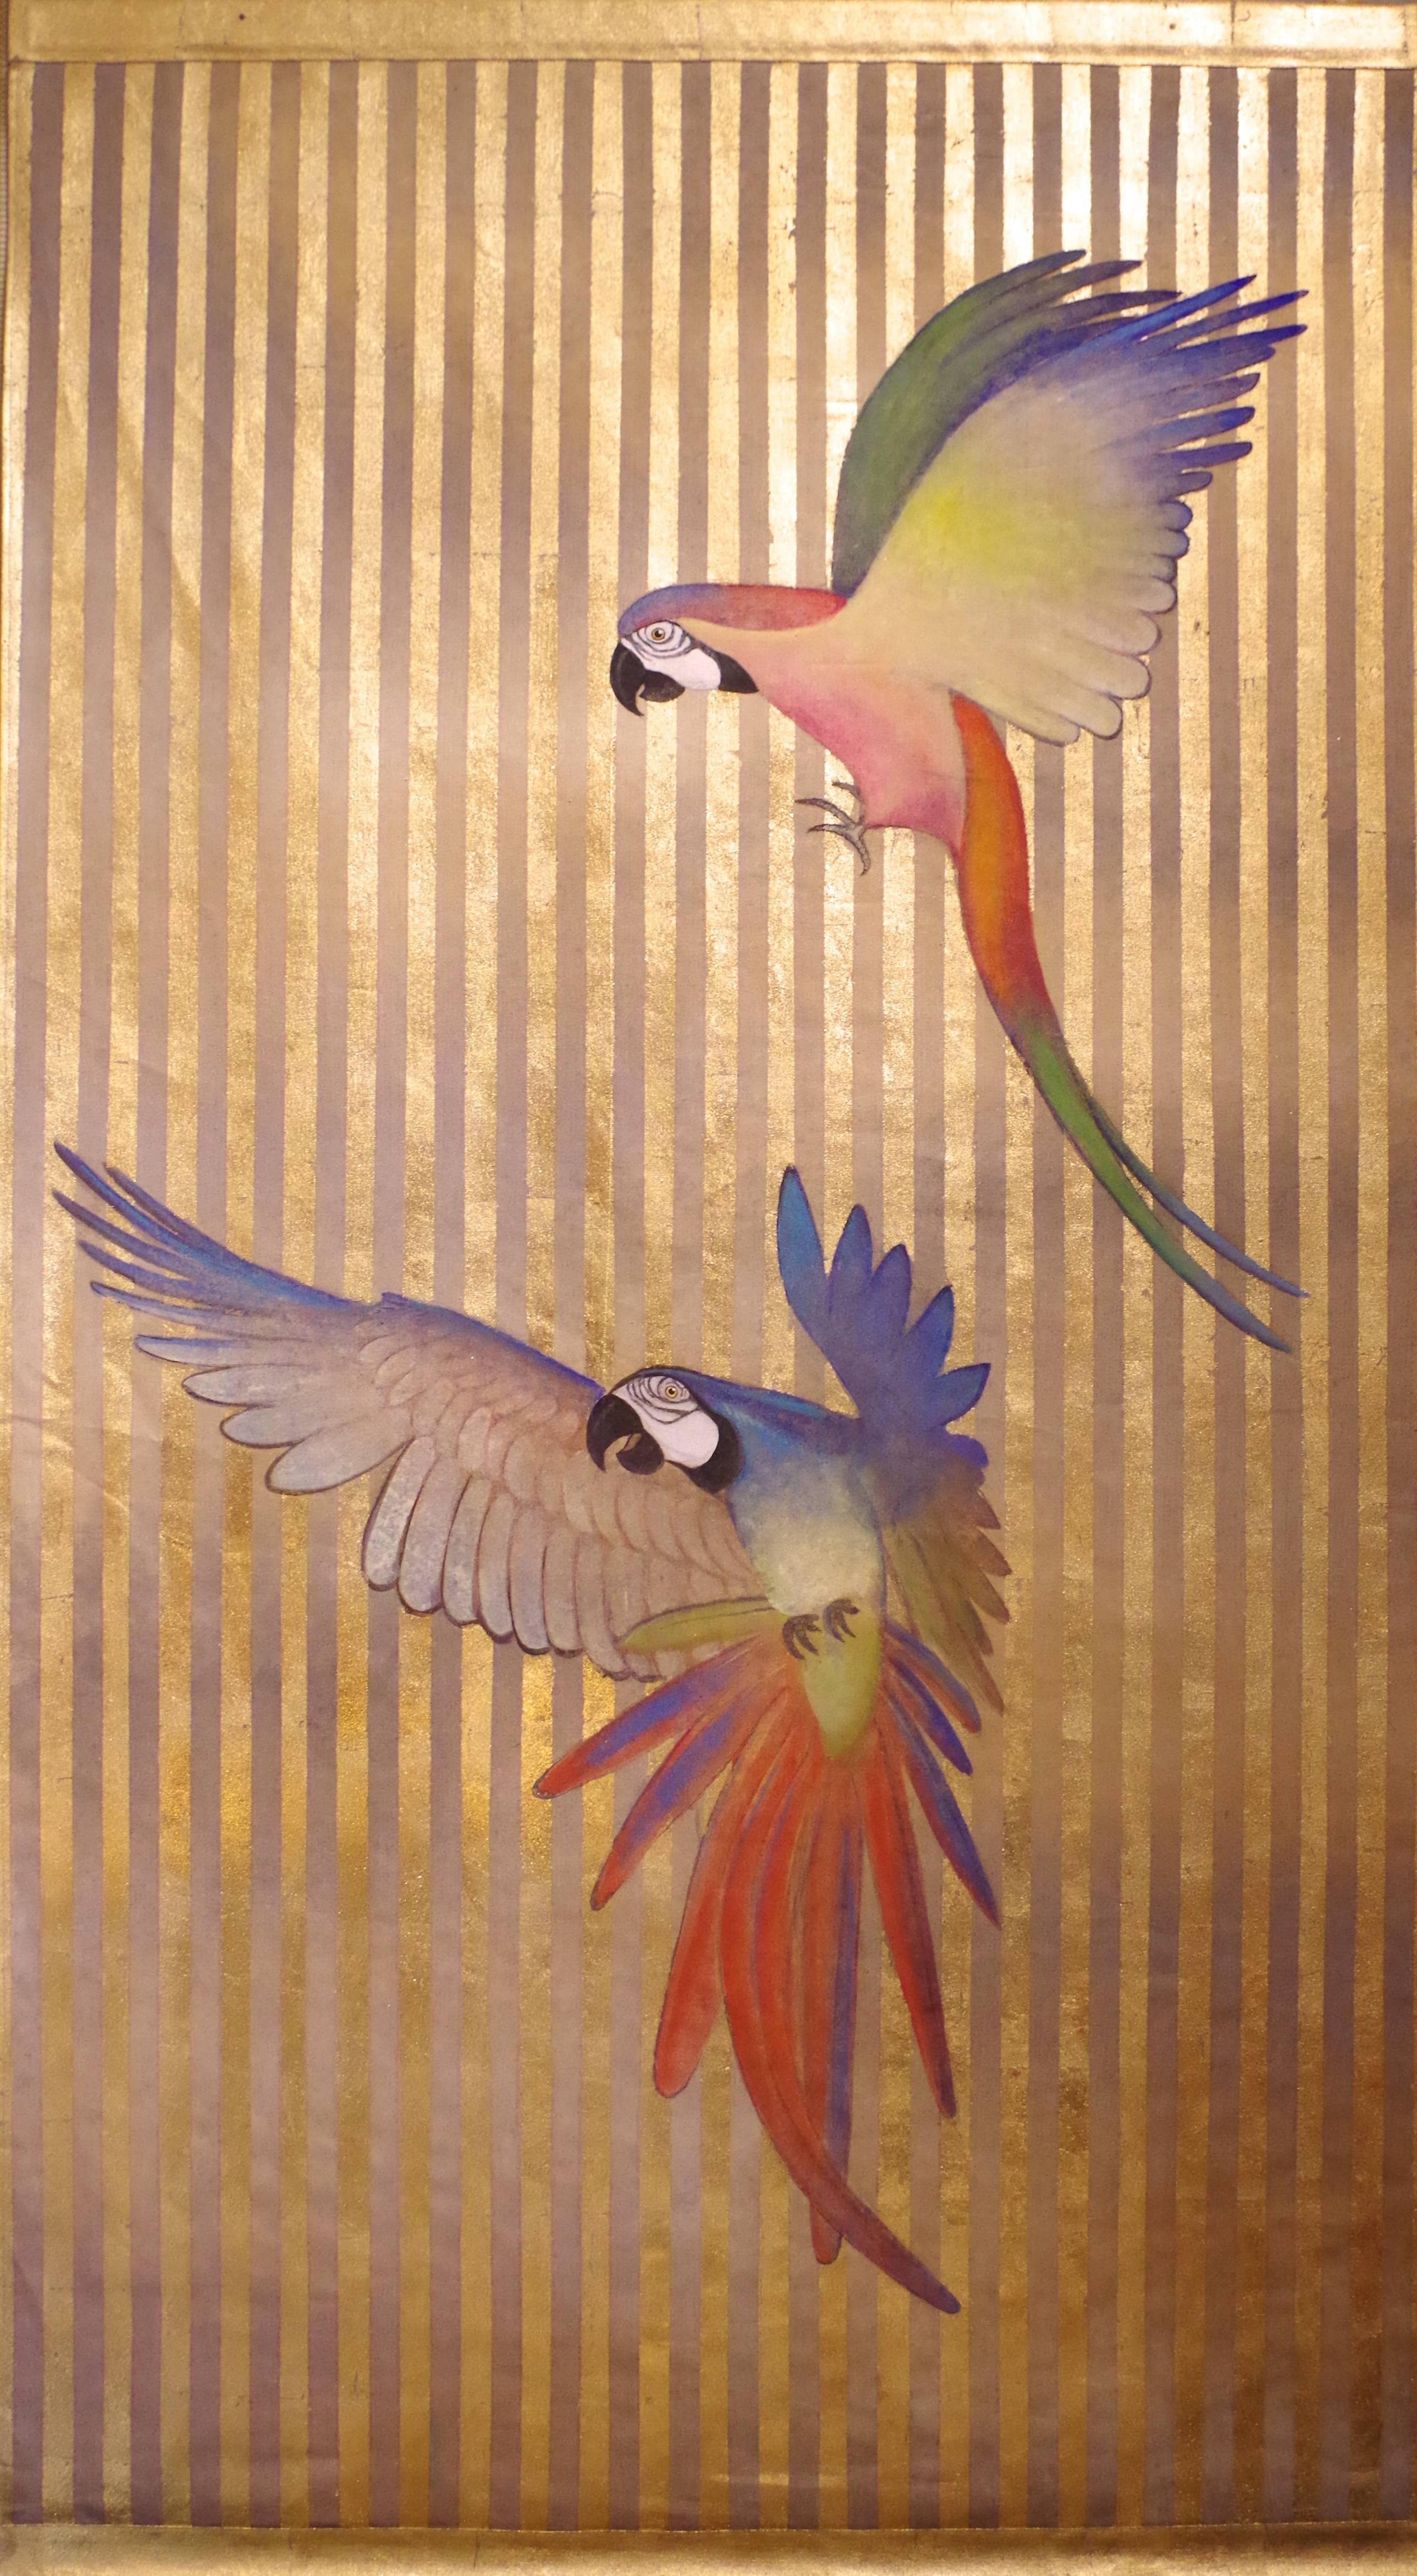 Pair of painted canvas figuring two flying multicolored parrots on gilt and brown stripes background.

Linen raw canvas hand painted with natural pigments and background gilt with copper leaf. Canvas stretched thanks to two wood sticks and the